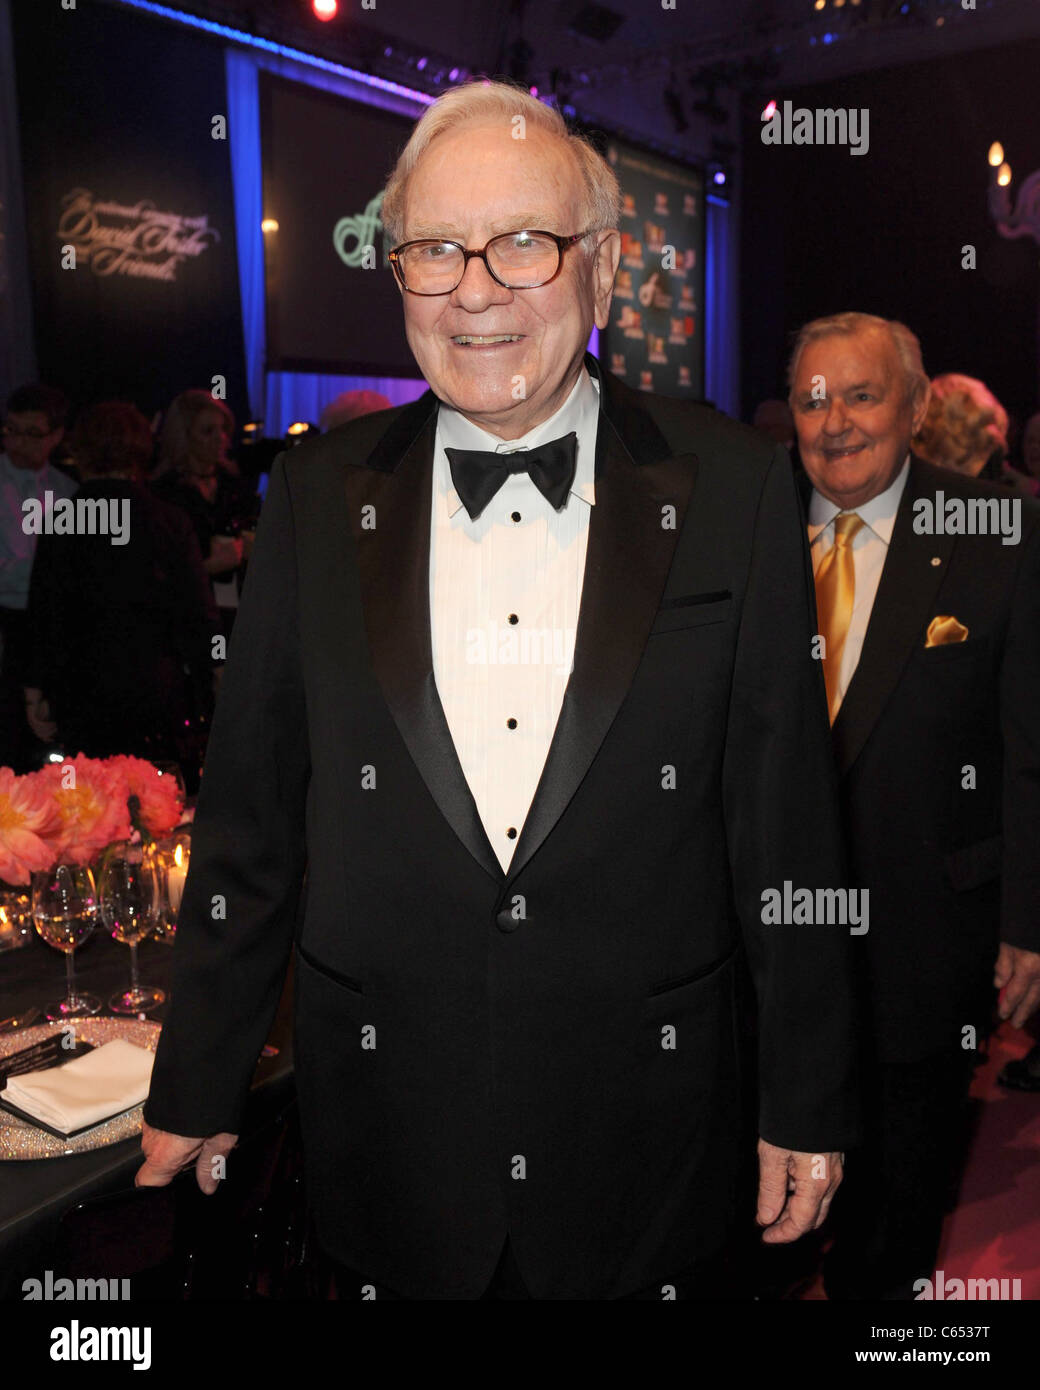 Warren Buffett in attendance for An Intimate Evening with David Foster and Friends, a private estate in Toronto, Toronto, ON November 19, 2010. Photo By: Tom Sandler/Everett Collection Stock Photo